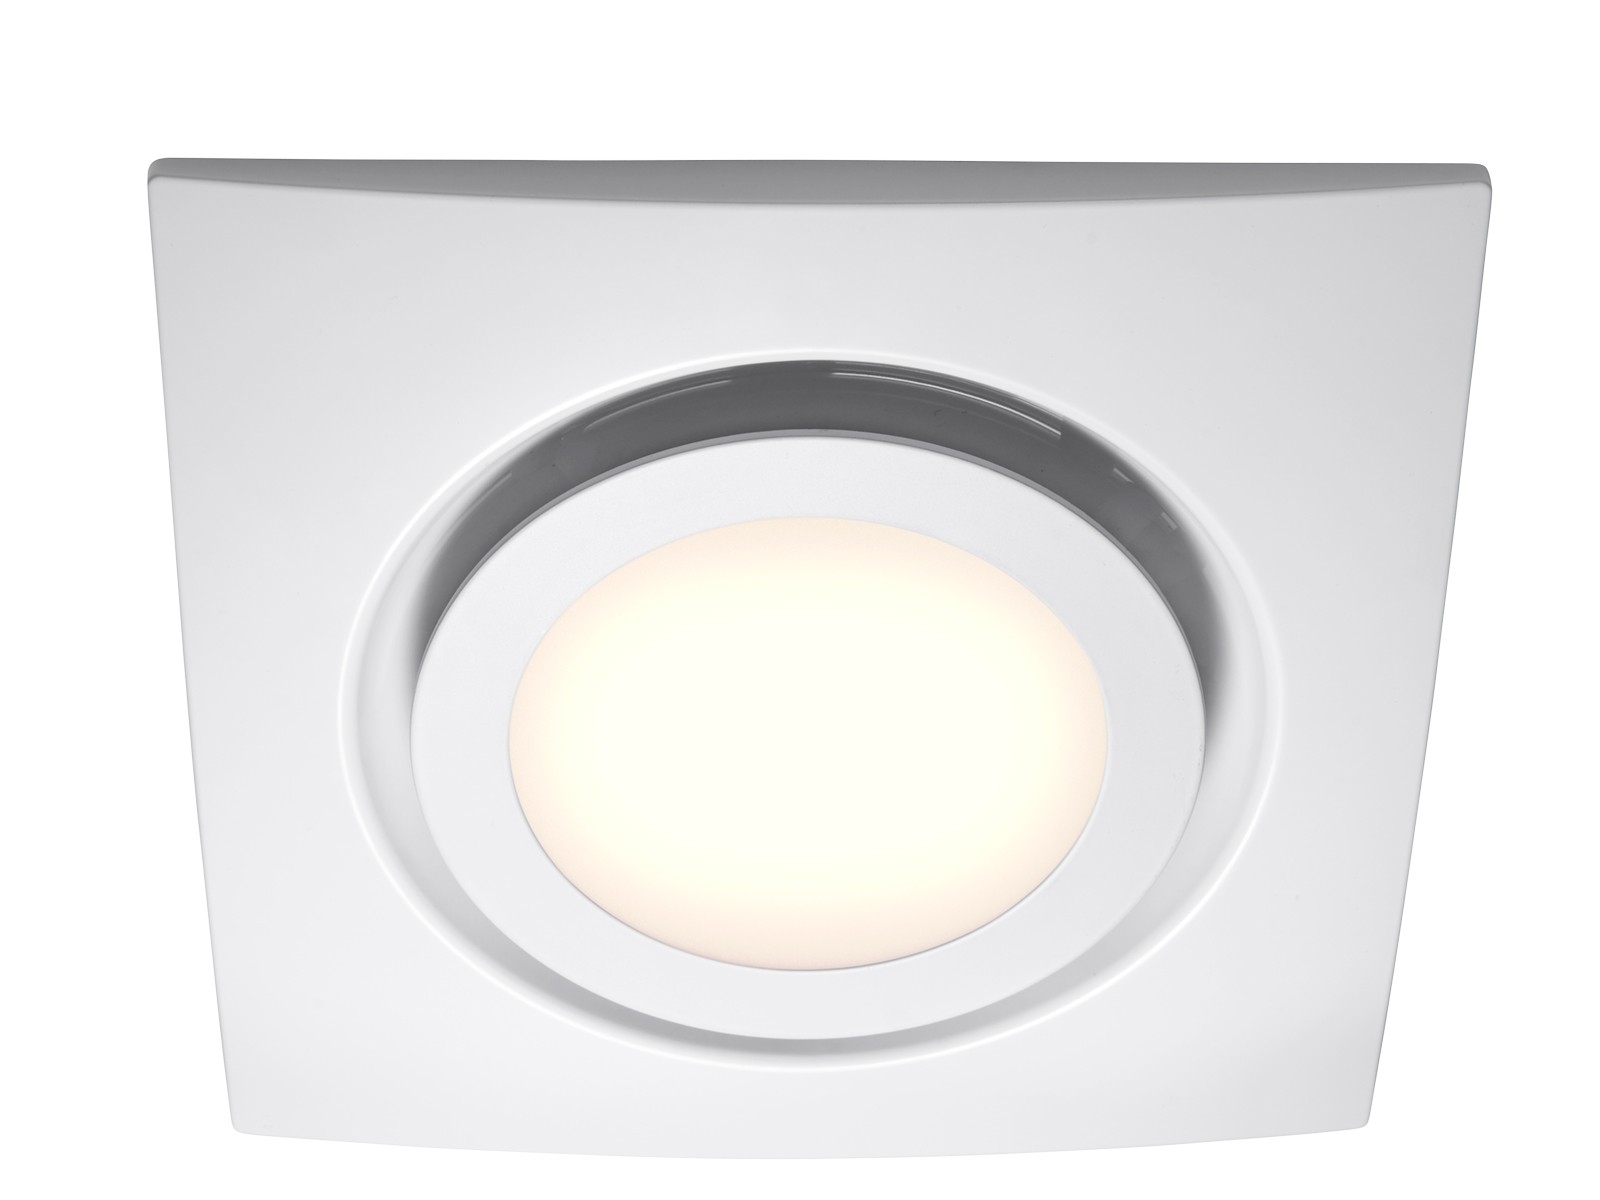 Permalink to Bathroom Ceiling Extractor Fan With Led Light